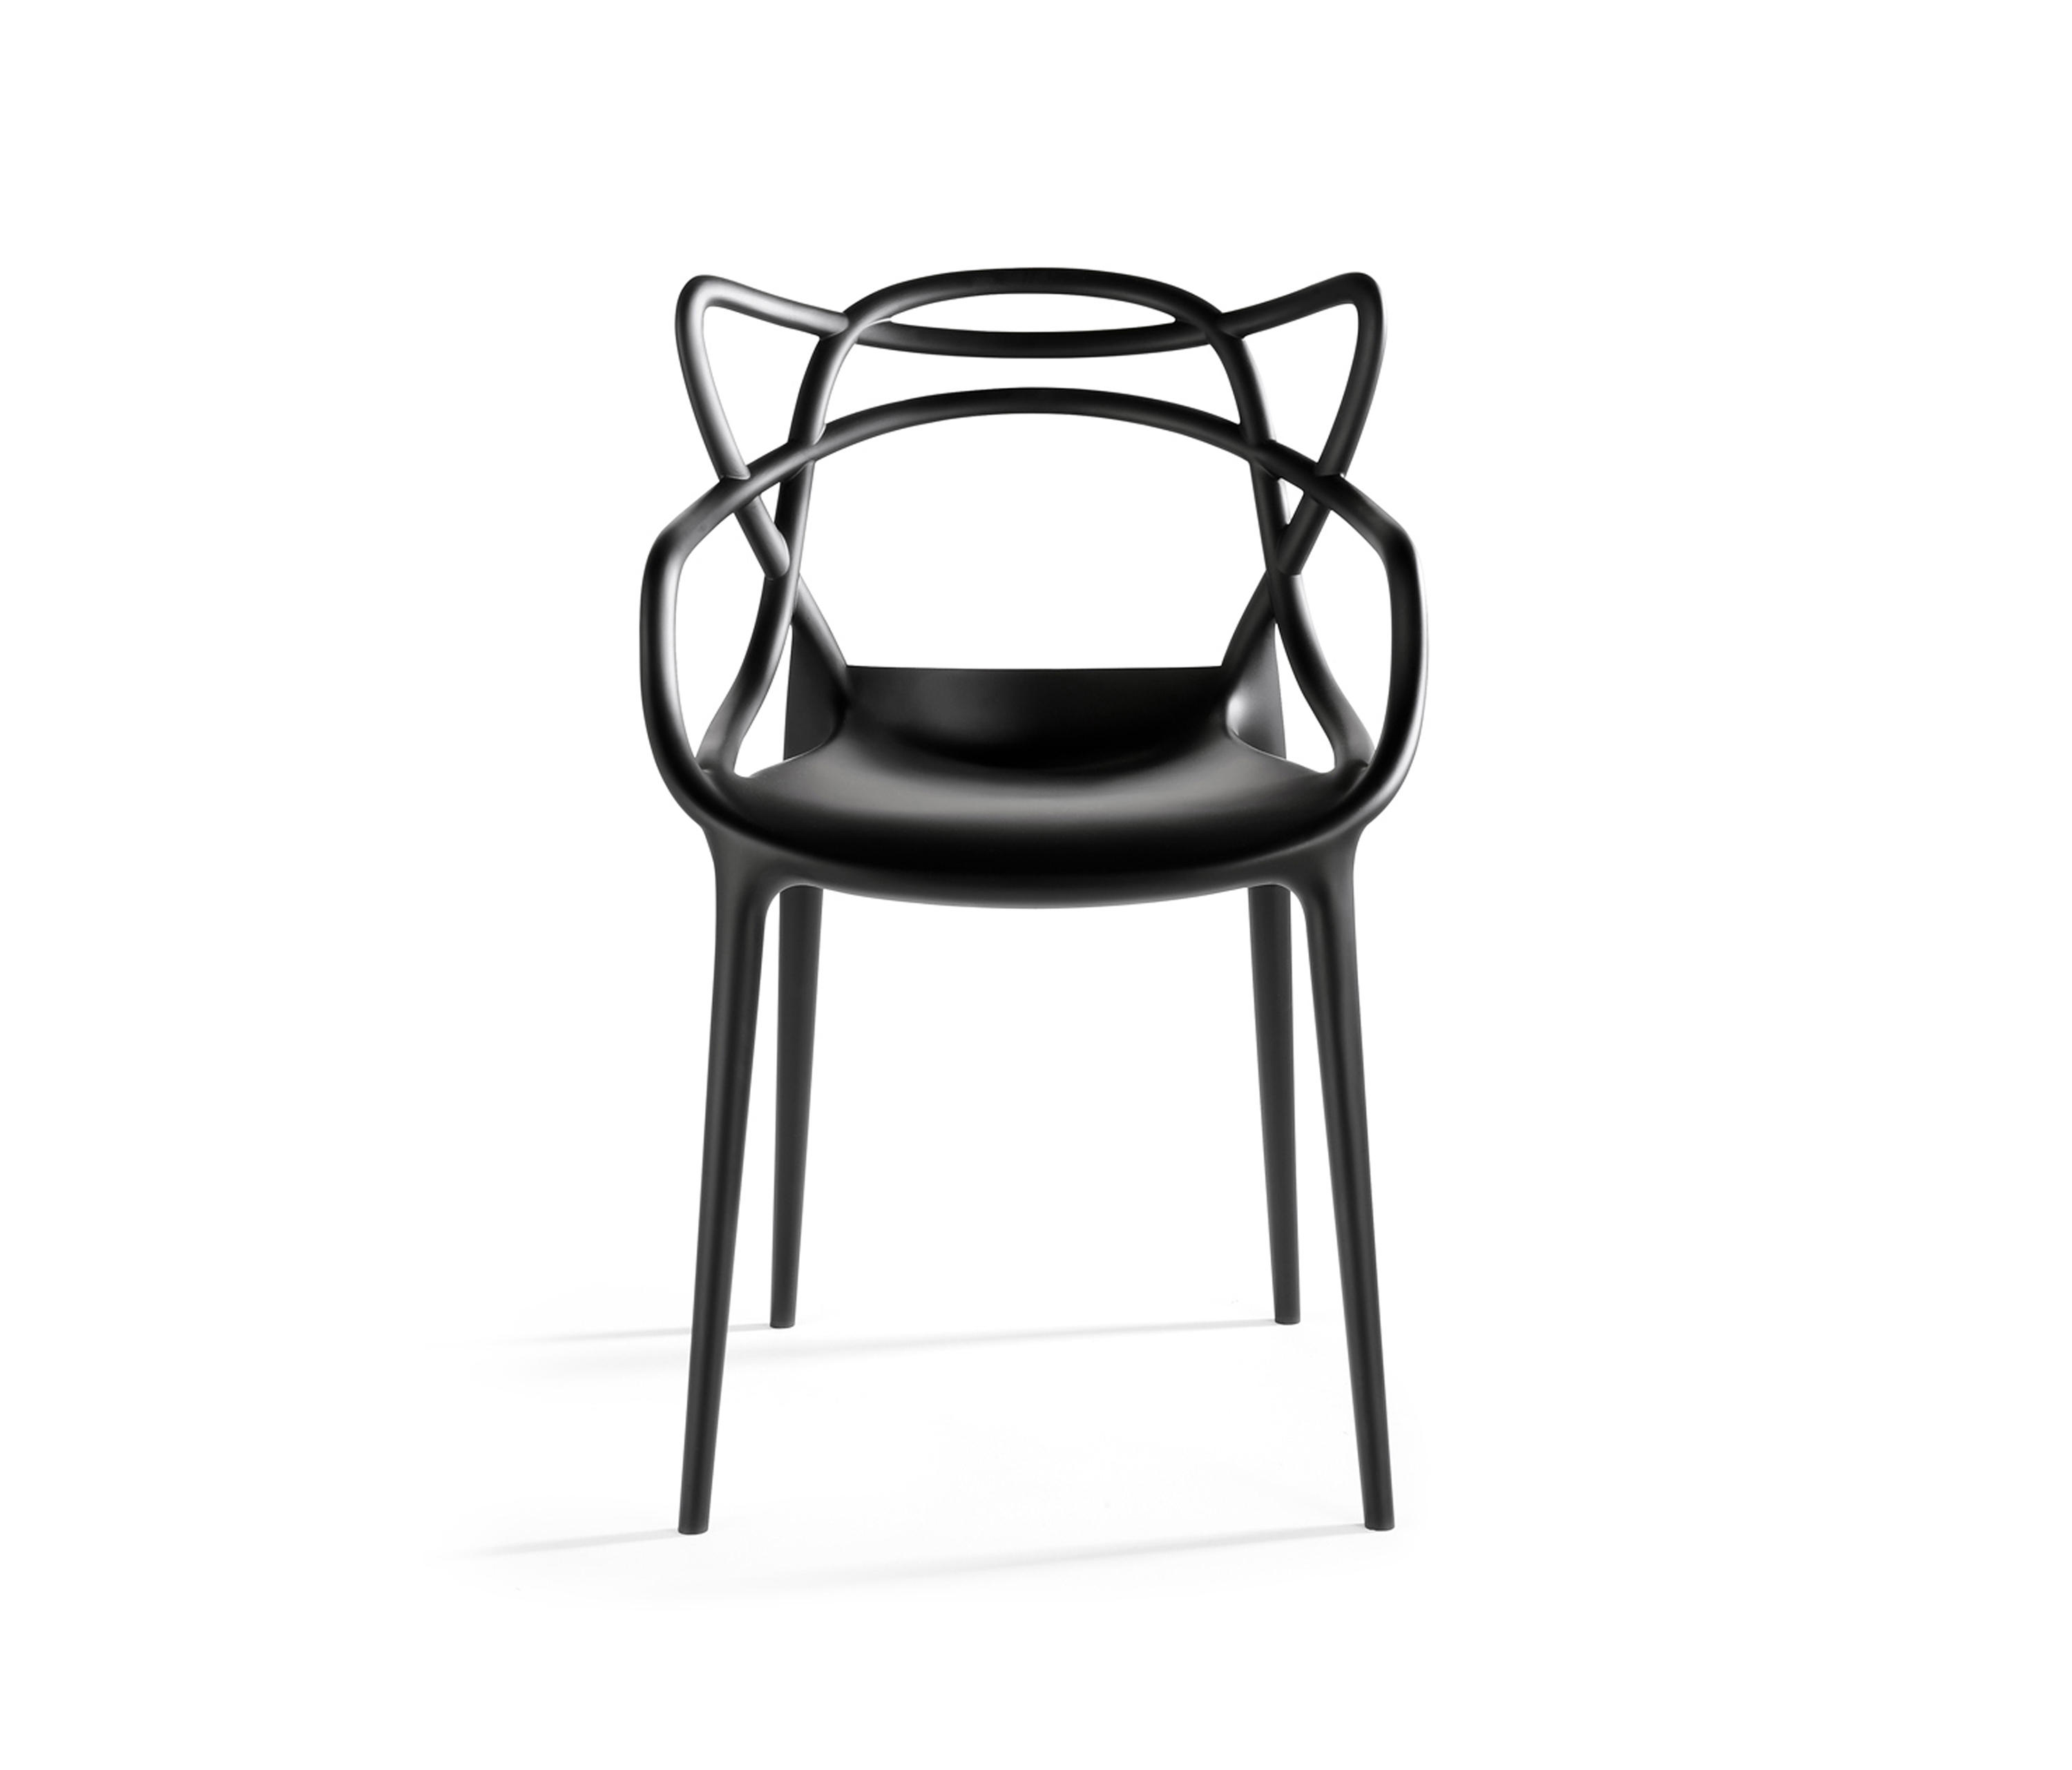 MASTERS CHAIR Chairs from | Architonic